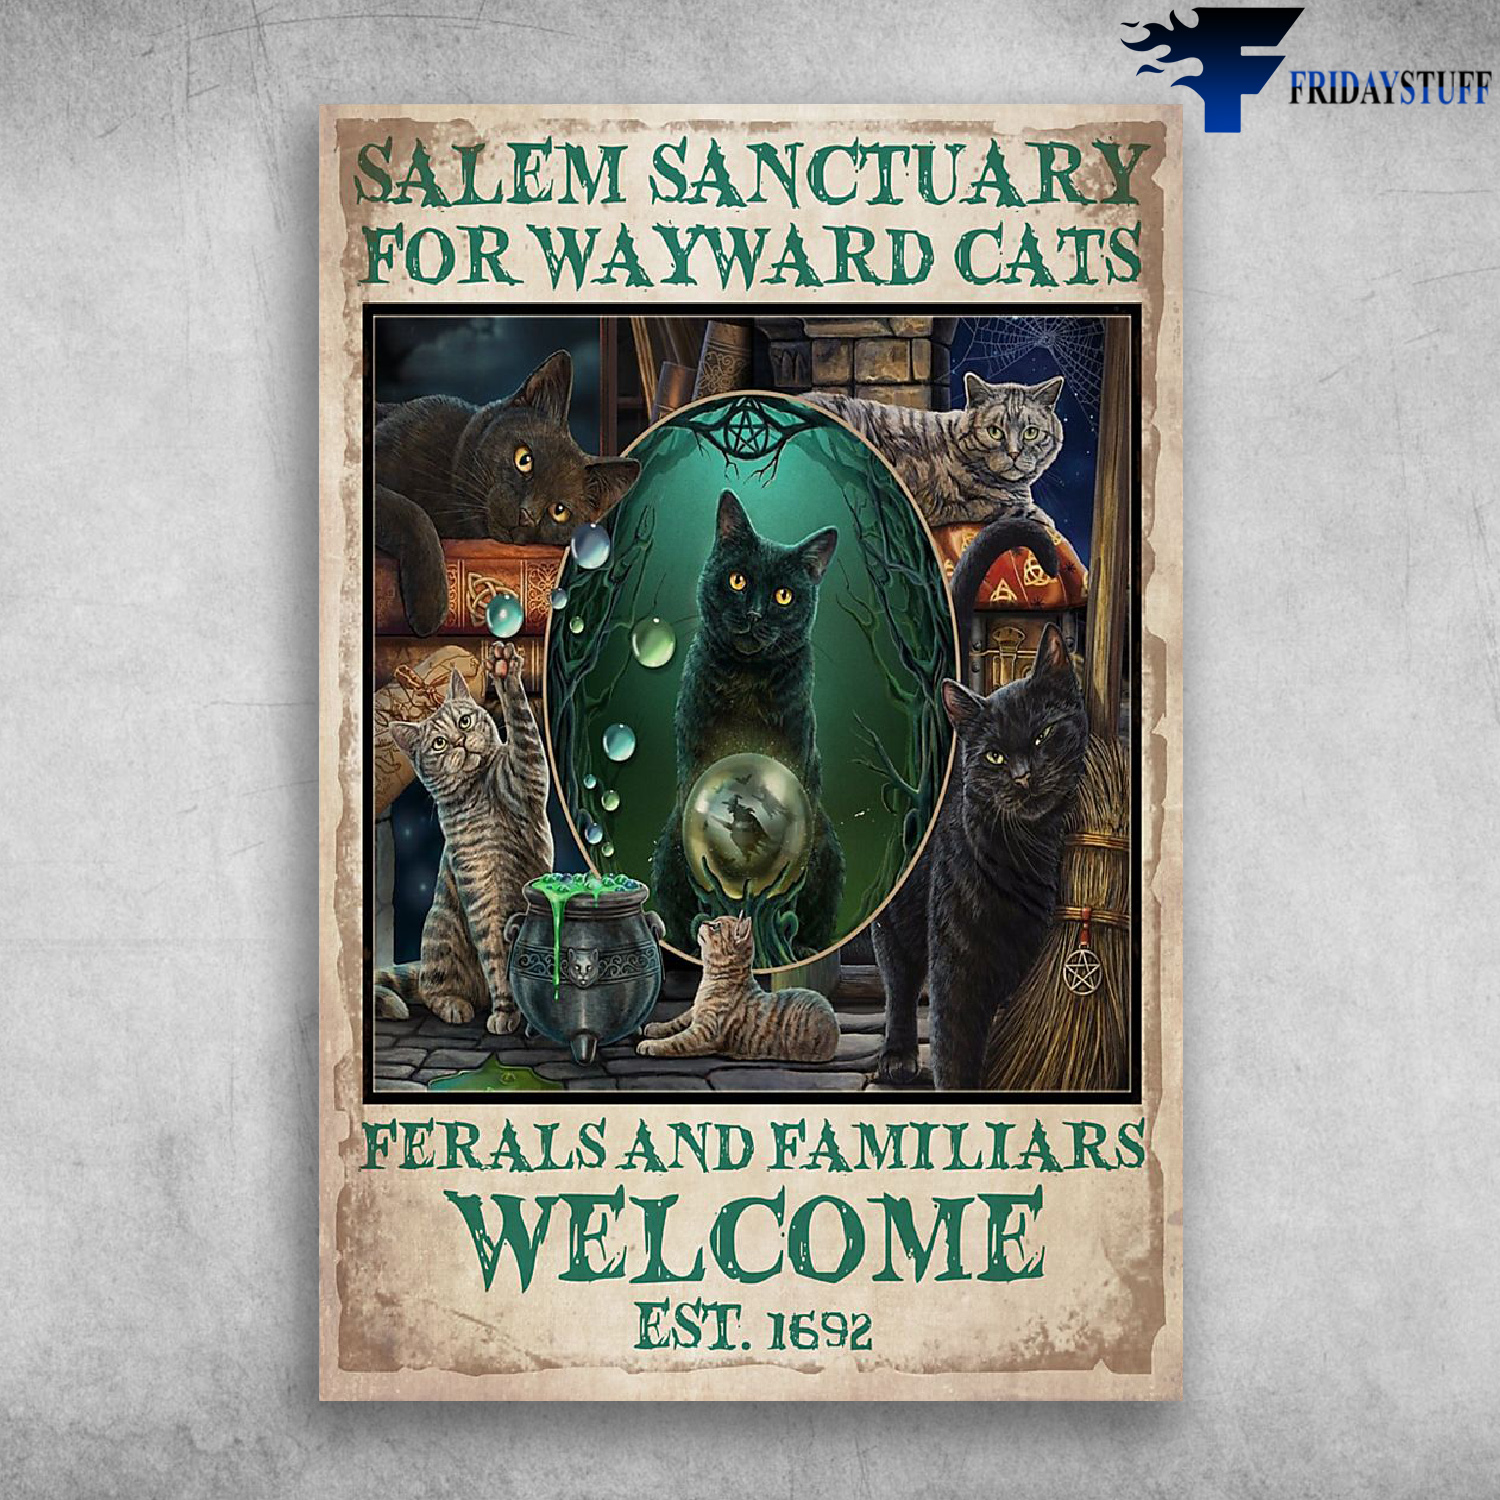 Black Cat Witch - Salem Sanctuary For Wayward Cats Ferals And Familiars Welcome Est 1692